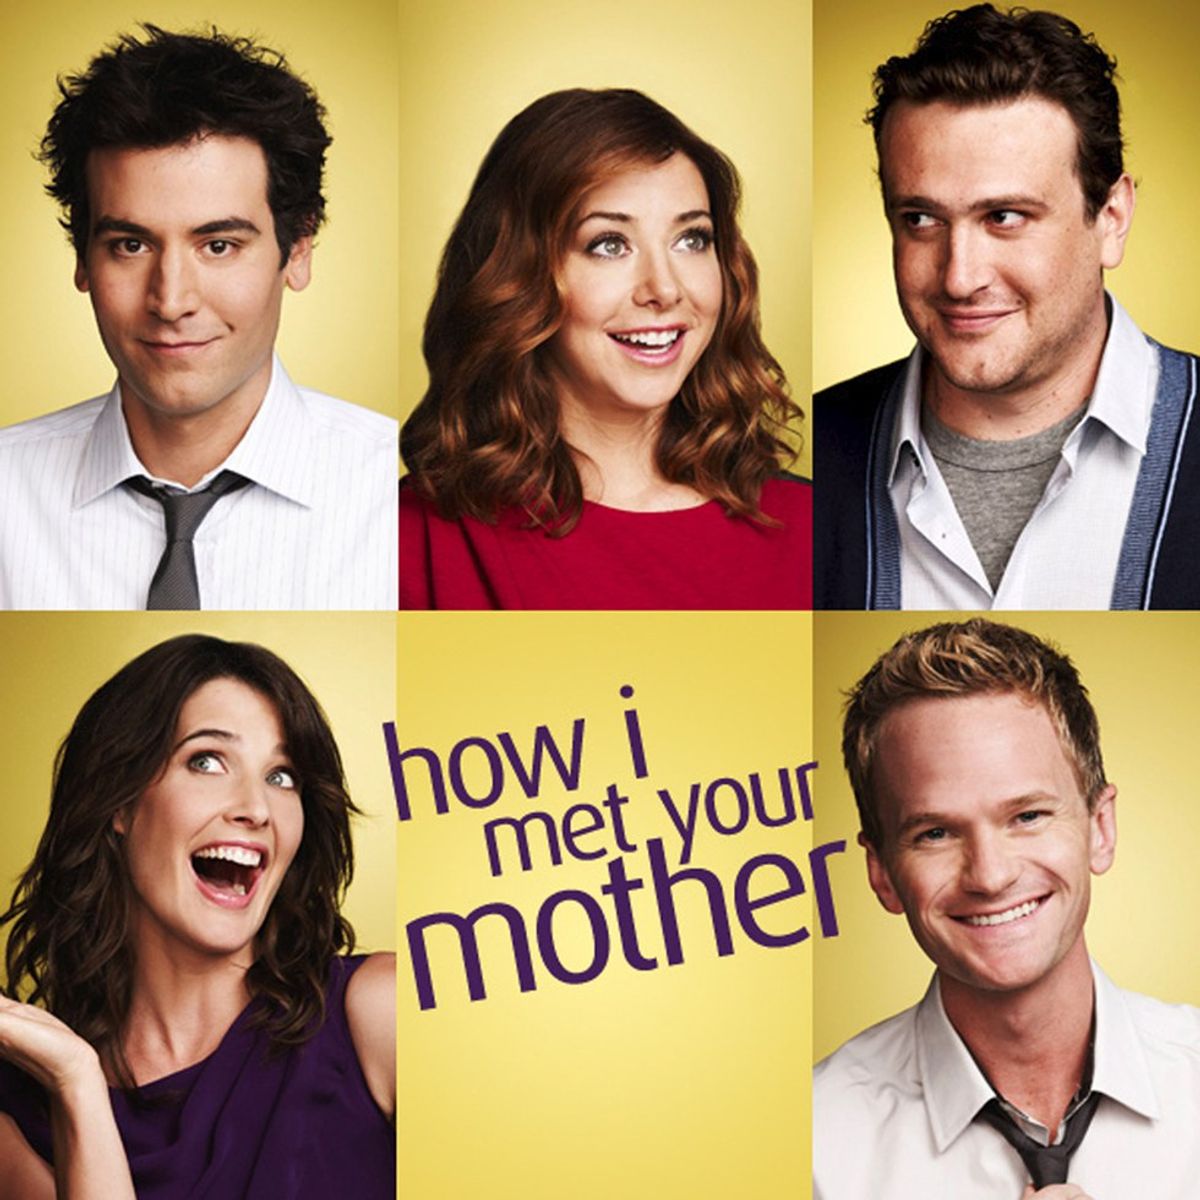 8 Reasons You Should Watch "How I Met Your Mother"